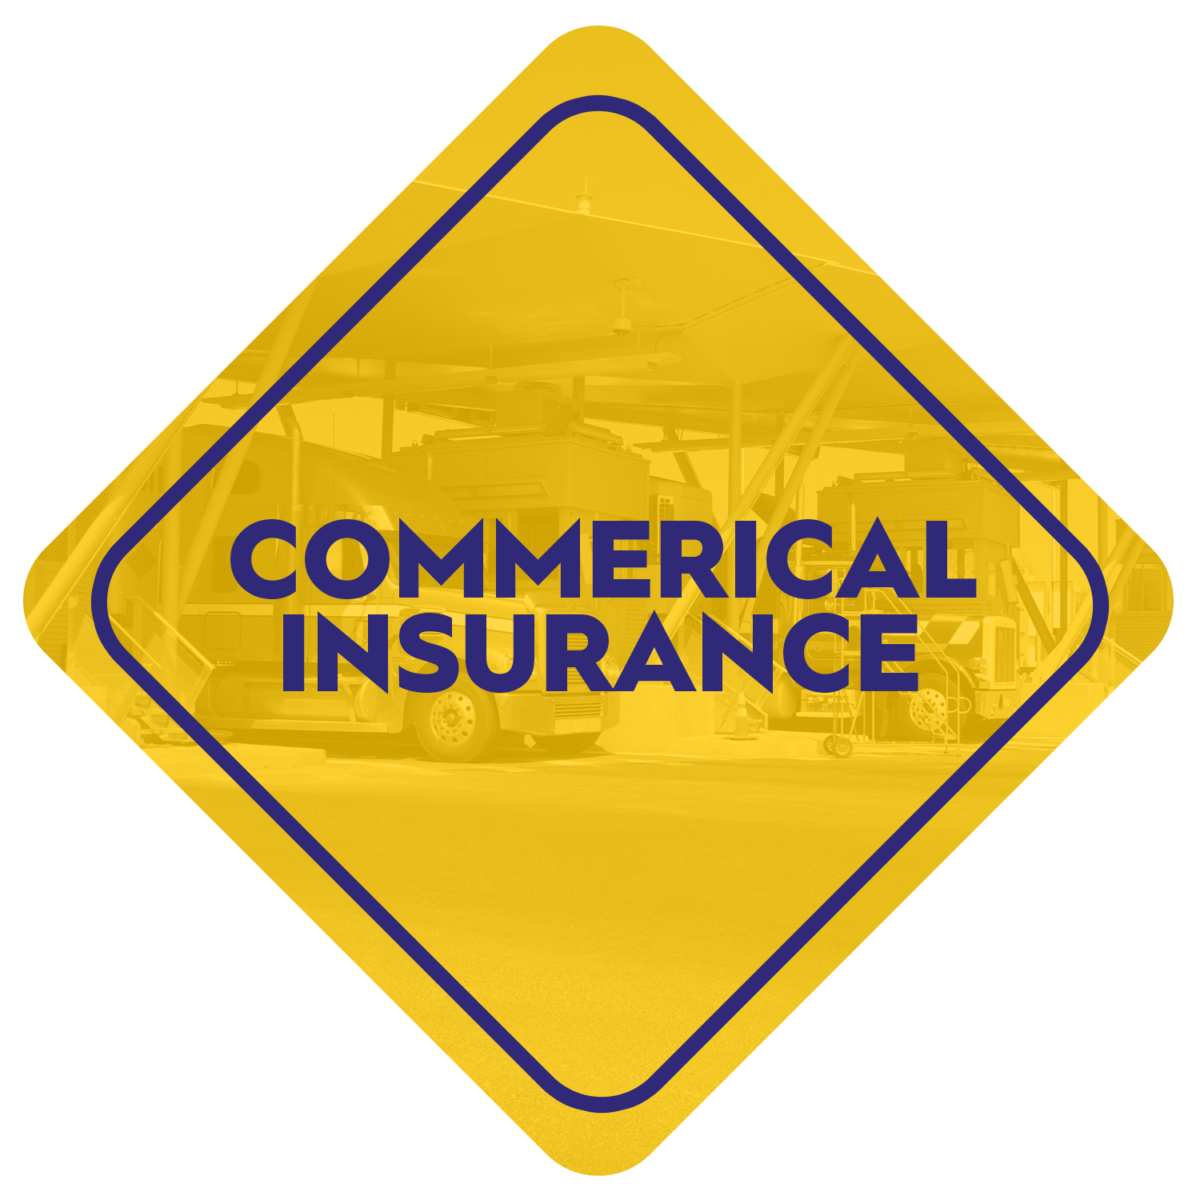 commercial-insurance-title-1200x1200.png